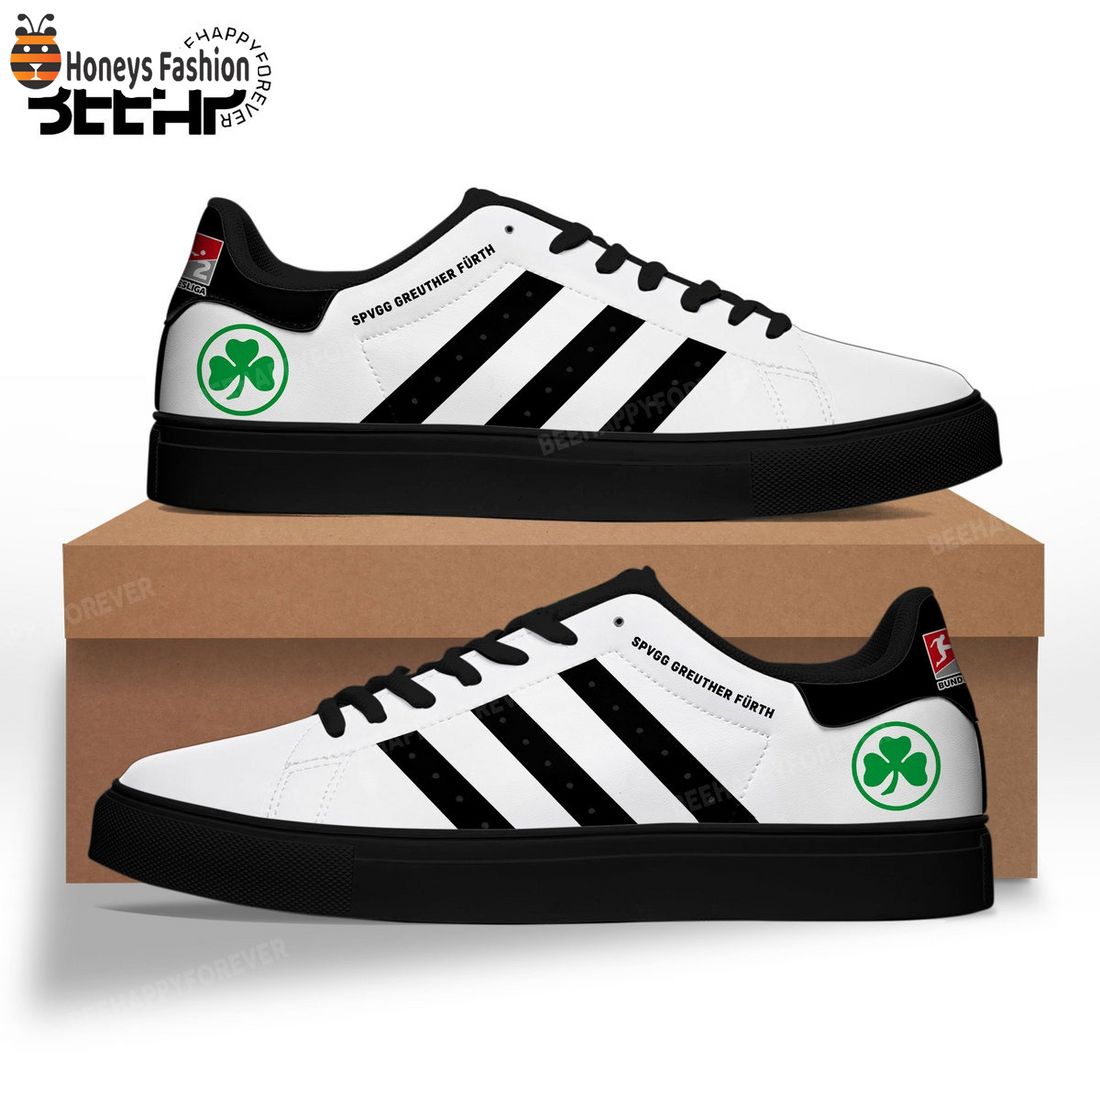 SpVgg Greuther Furth Adidas Stan Smith Trainers